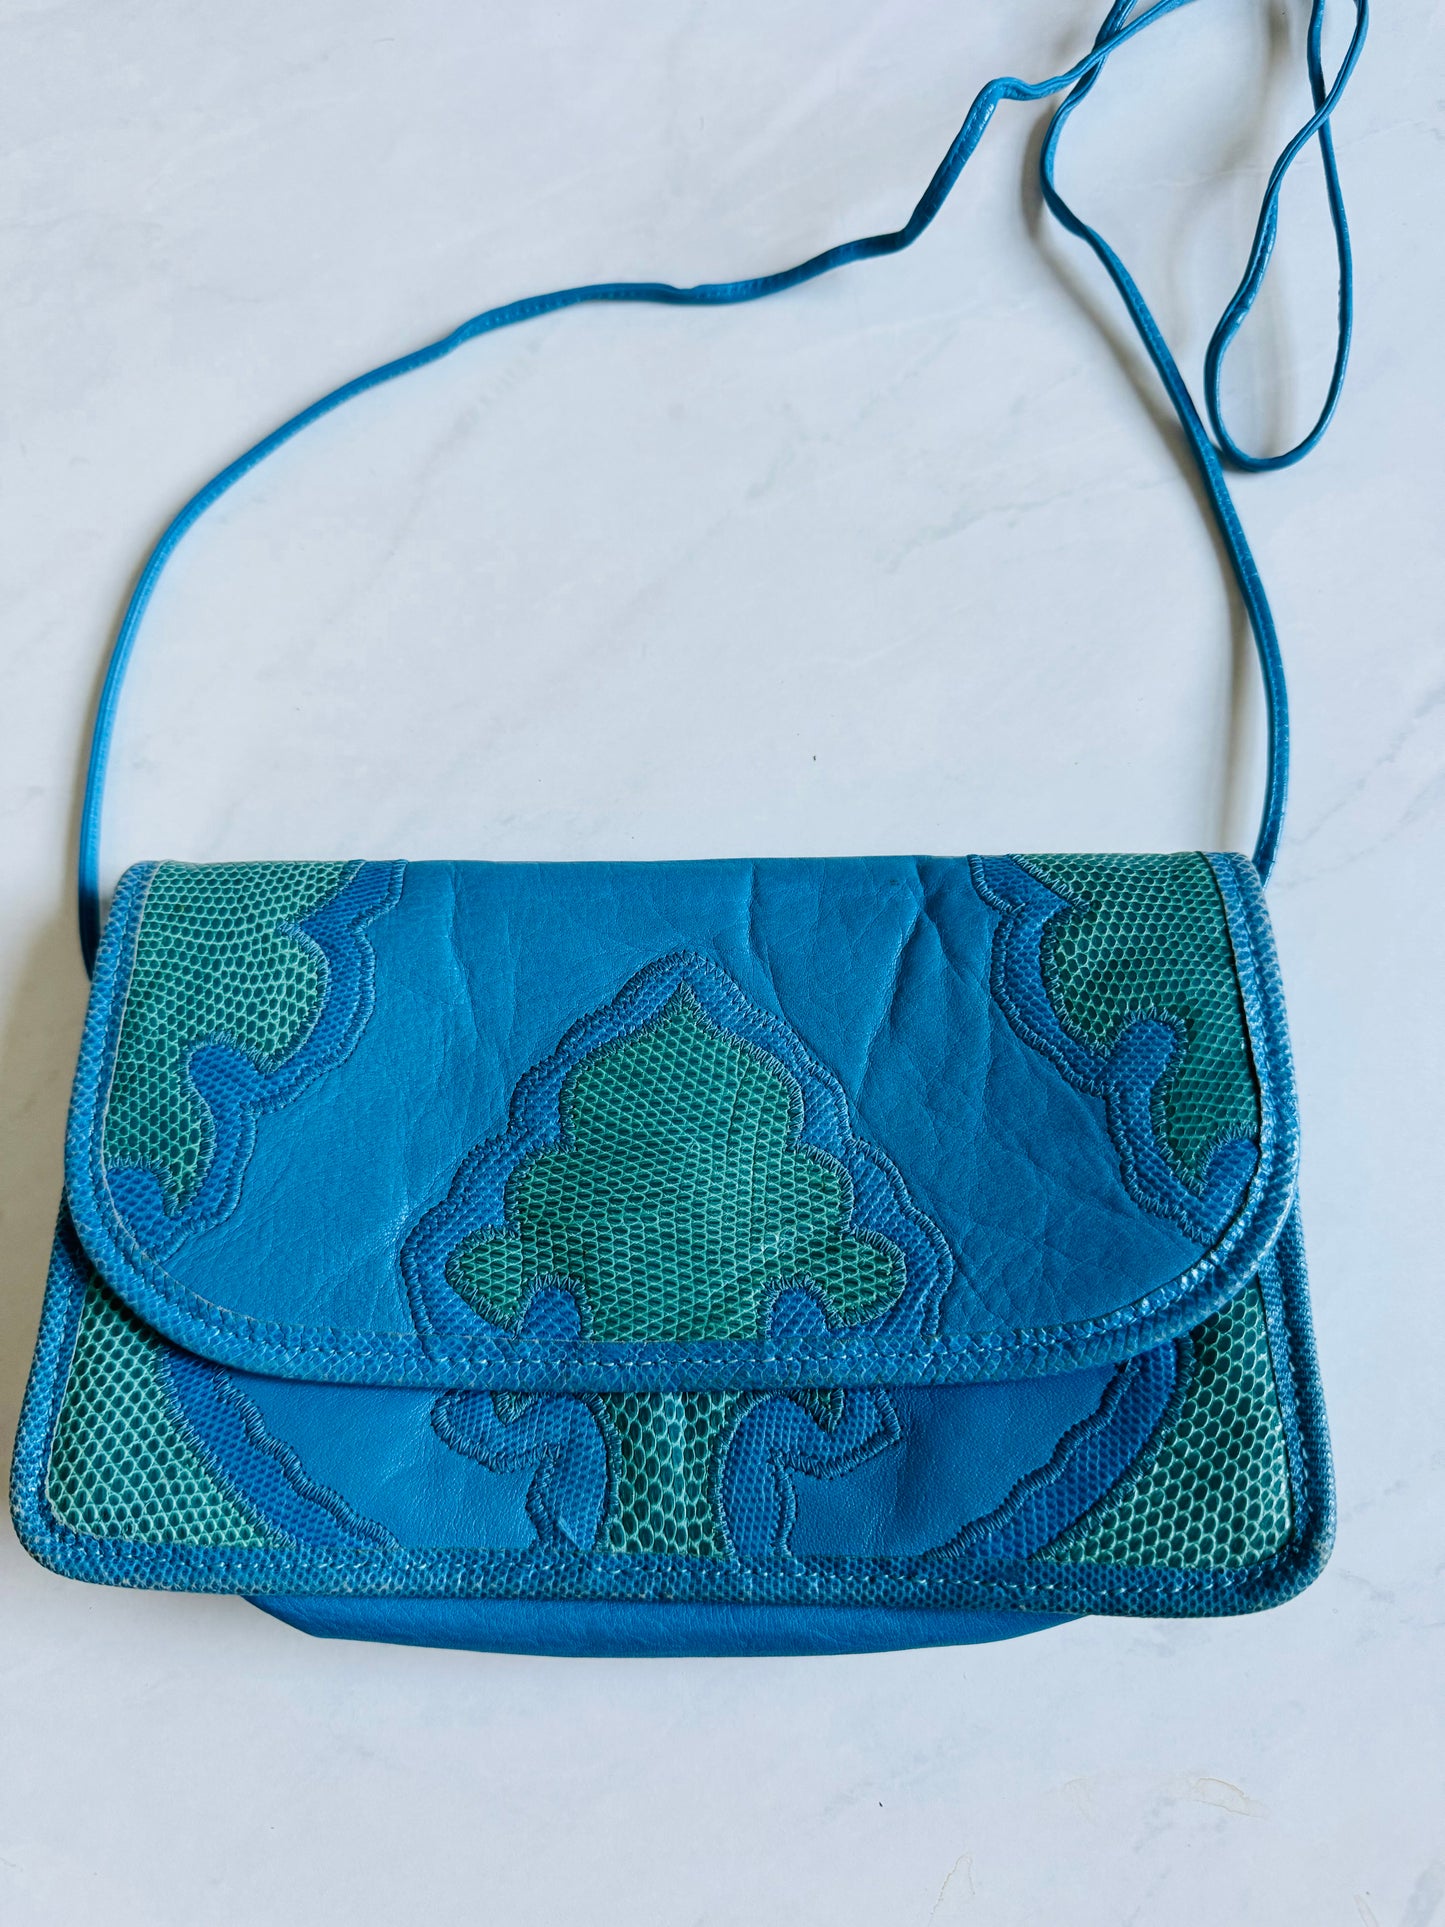 Vintage turquoise and green snakeskin Carlos Falchi clutch